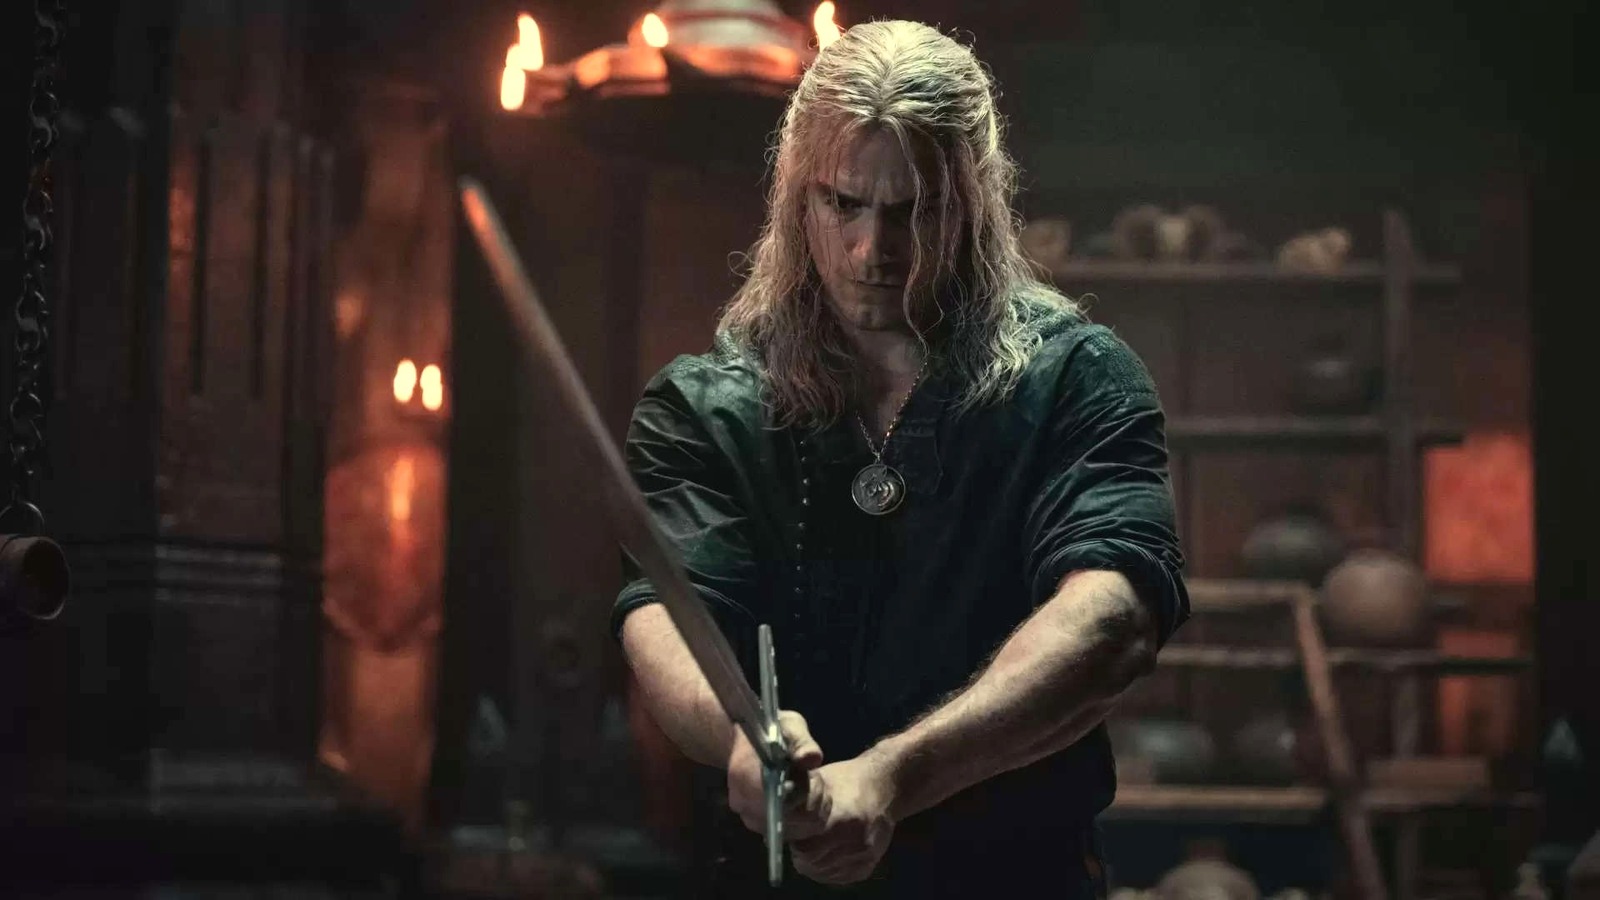 The Witcher S3 E2 Introduces The Series' Most Tragic & Terrifying Monster  Yet